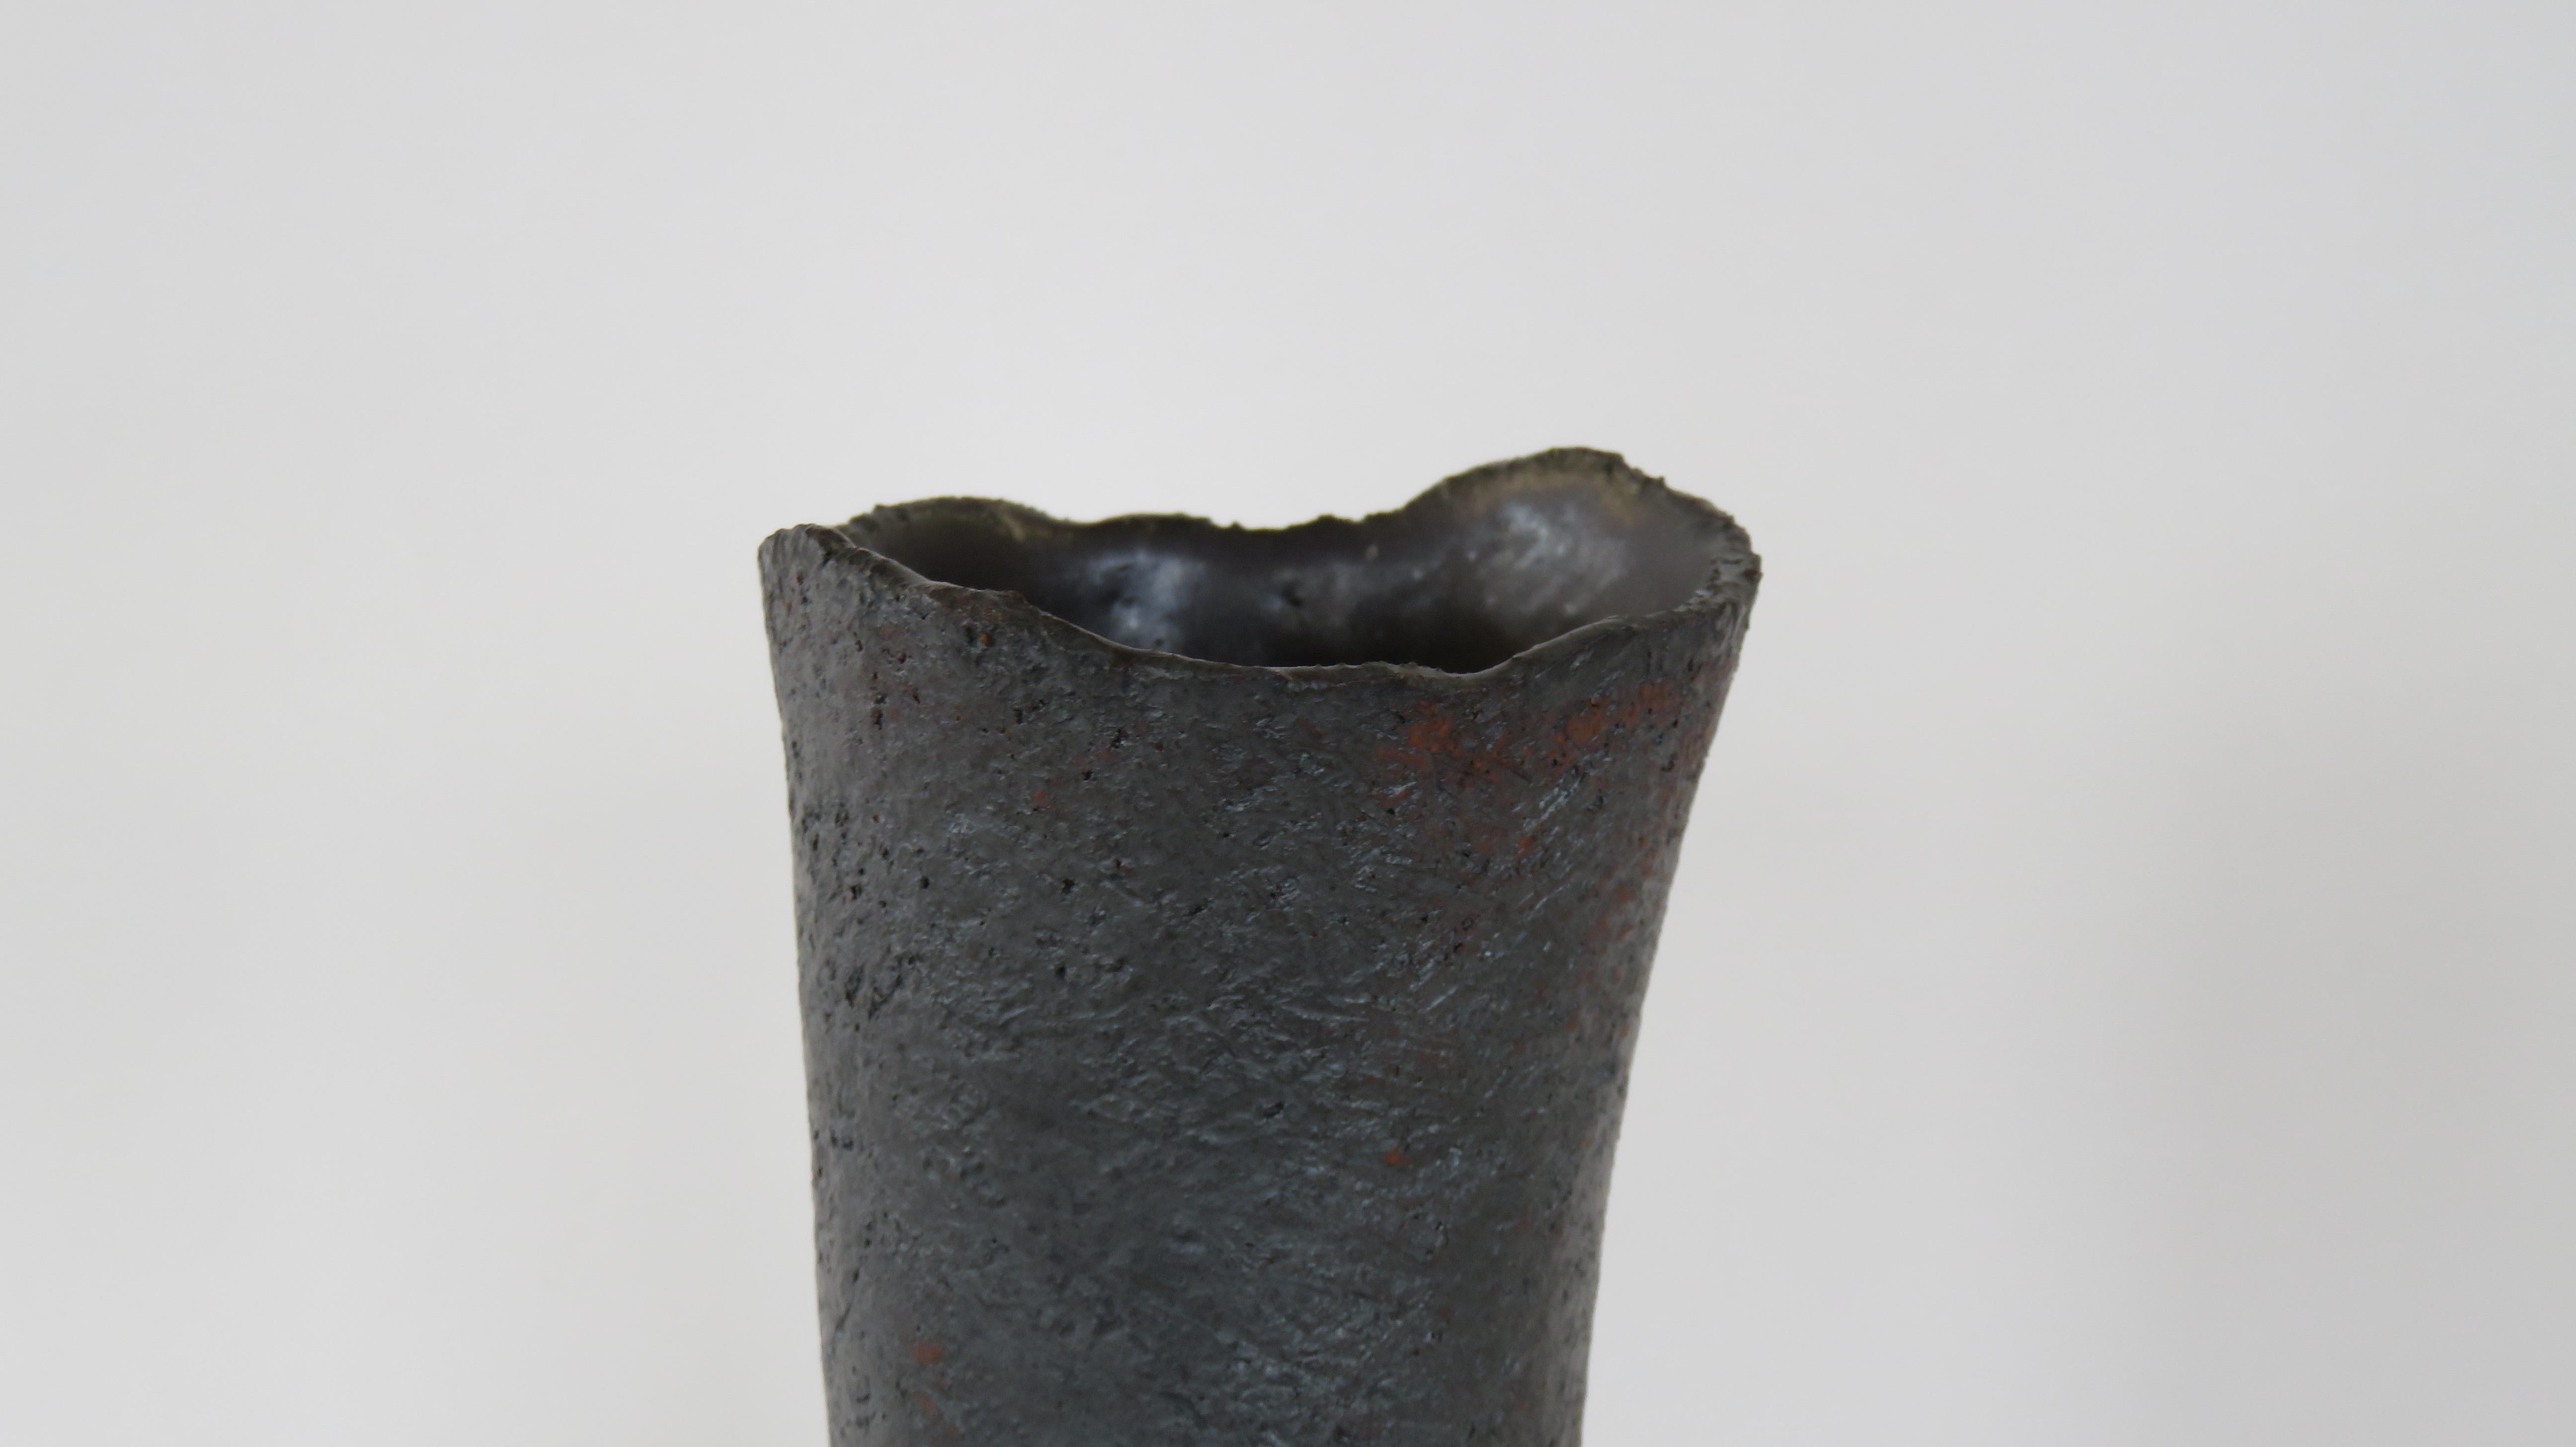 These tall vases in a metallic black glaze over stoneware are weighted on the bottom for tall floral arrangements or branches. Each surface is scraped to show the texture and tone of the clay, with varying bases or knobby edges. The top rims are